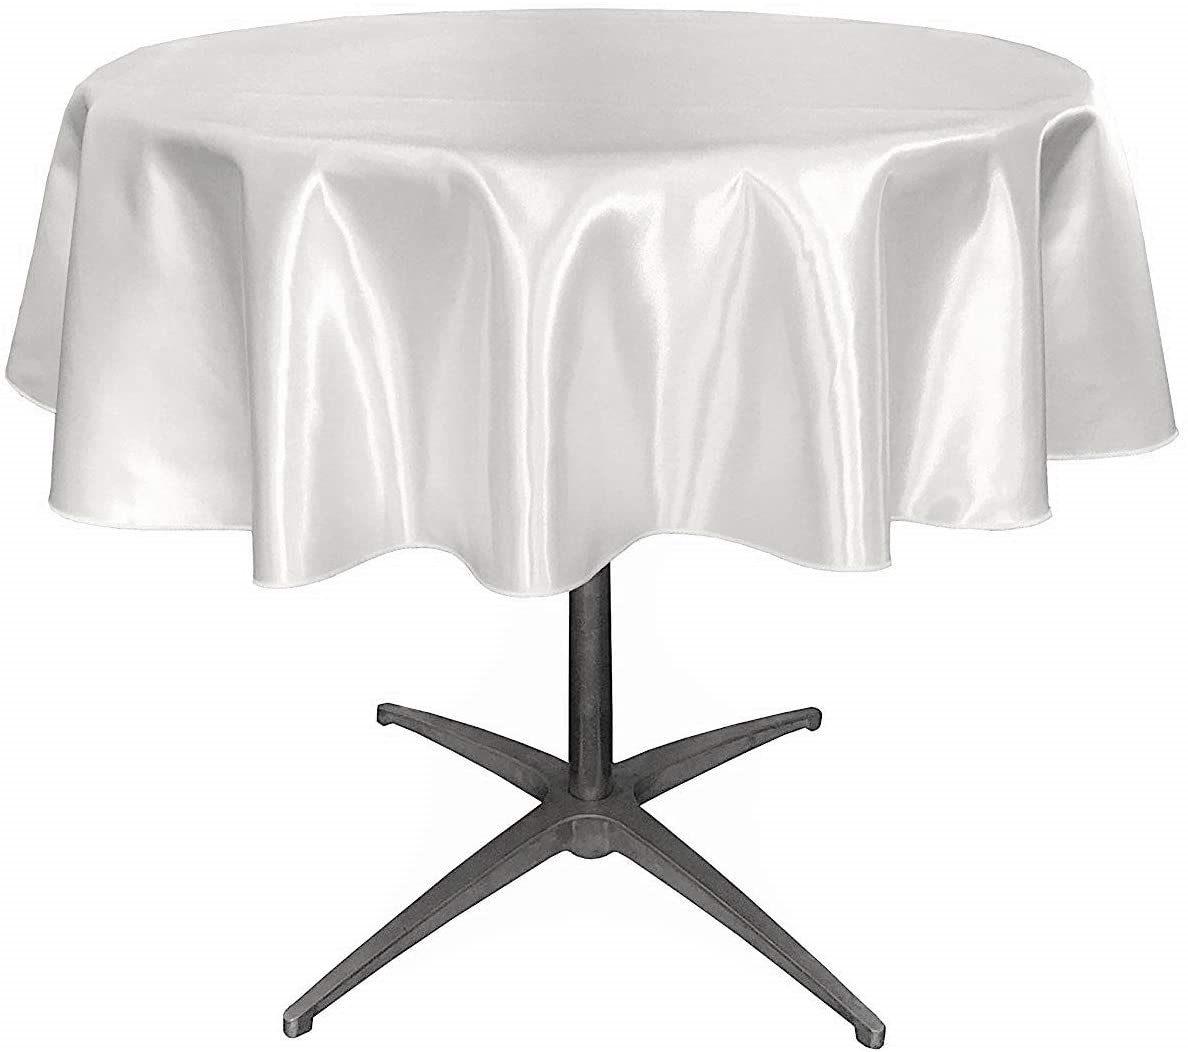 Bridal Satin Table Overlay, for Small Coffee Table (White,